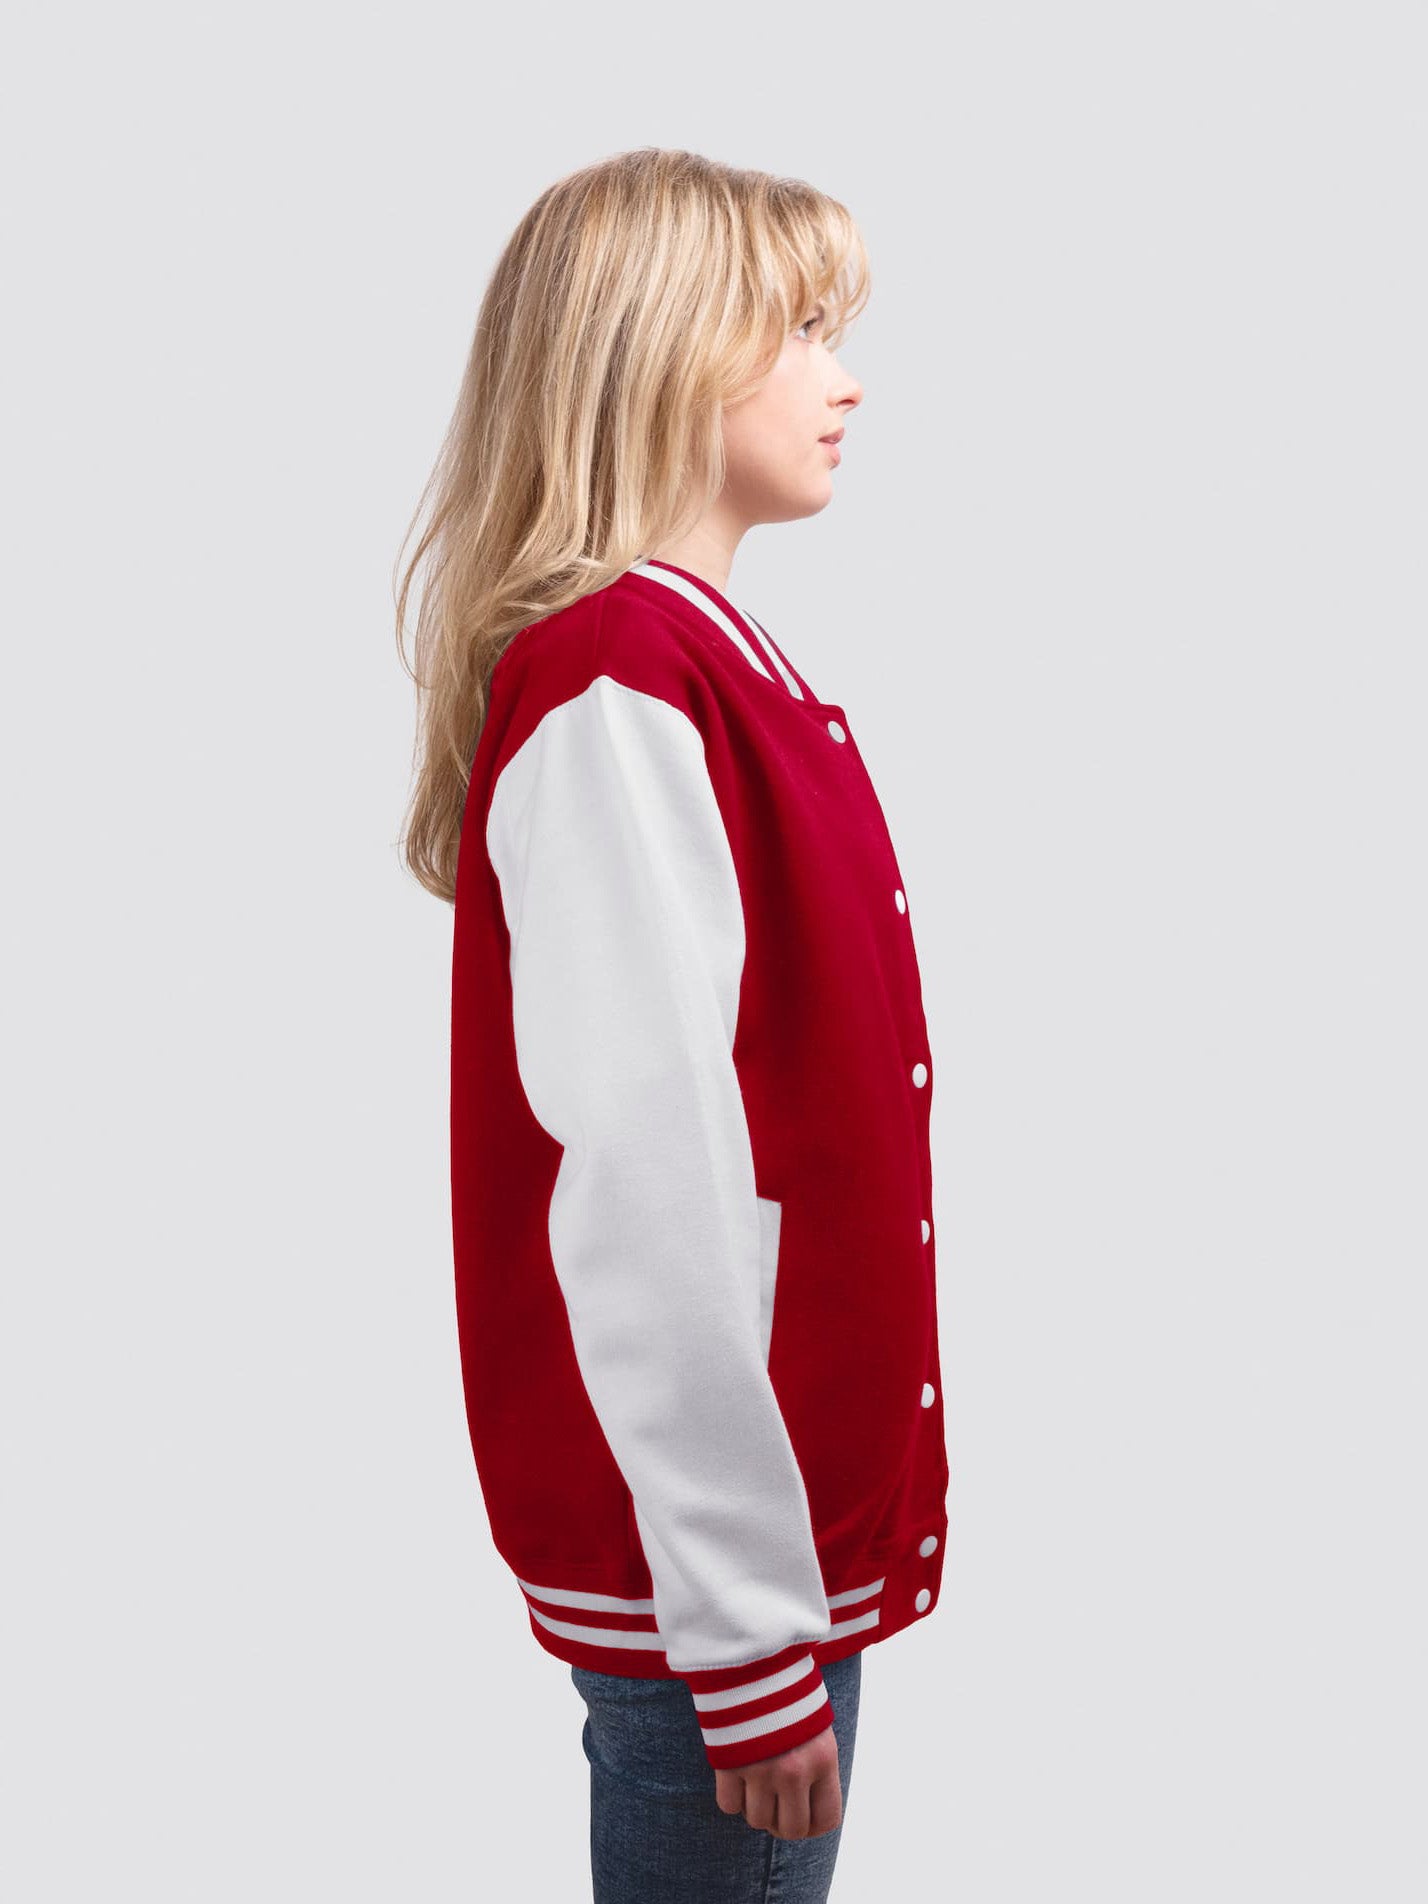  Fire red vintage bomber jacket, from Redbird Appare